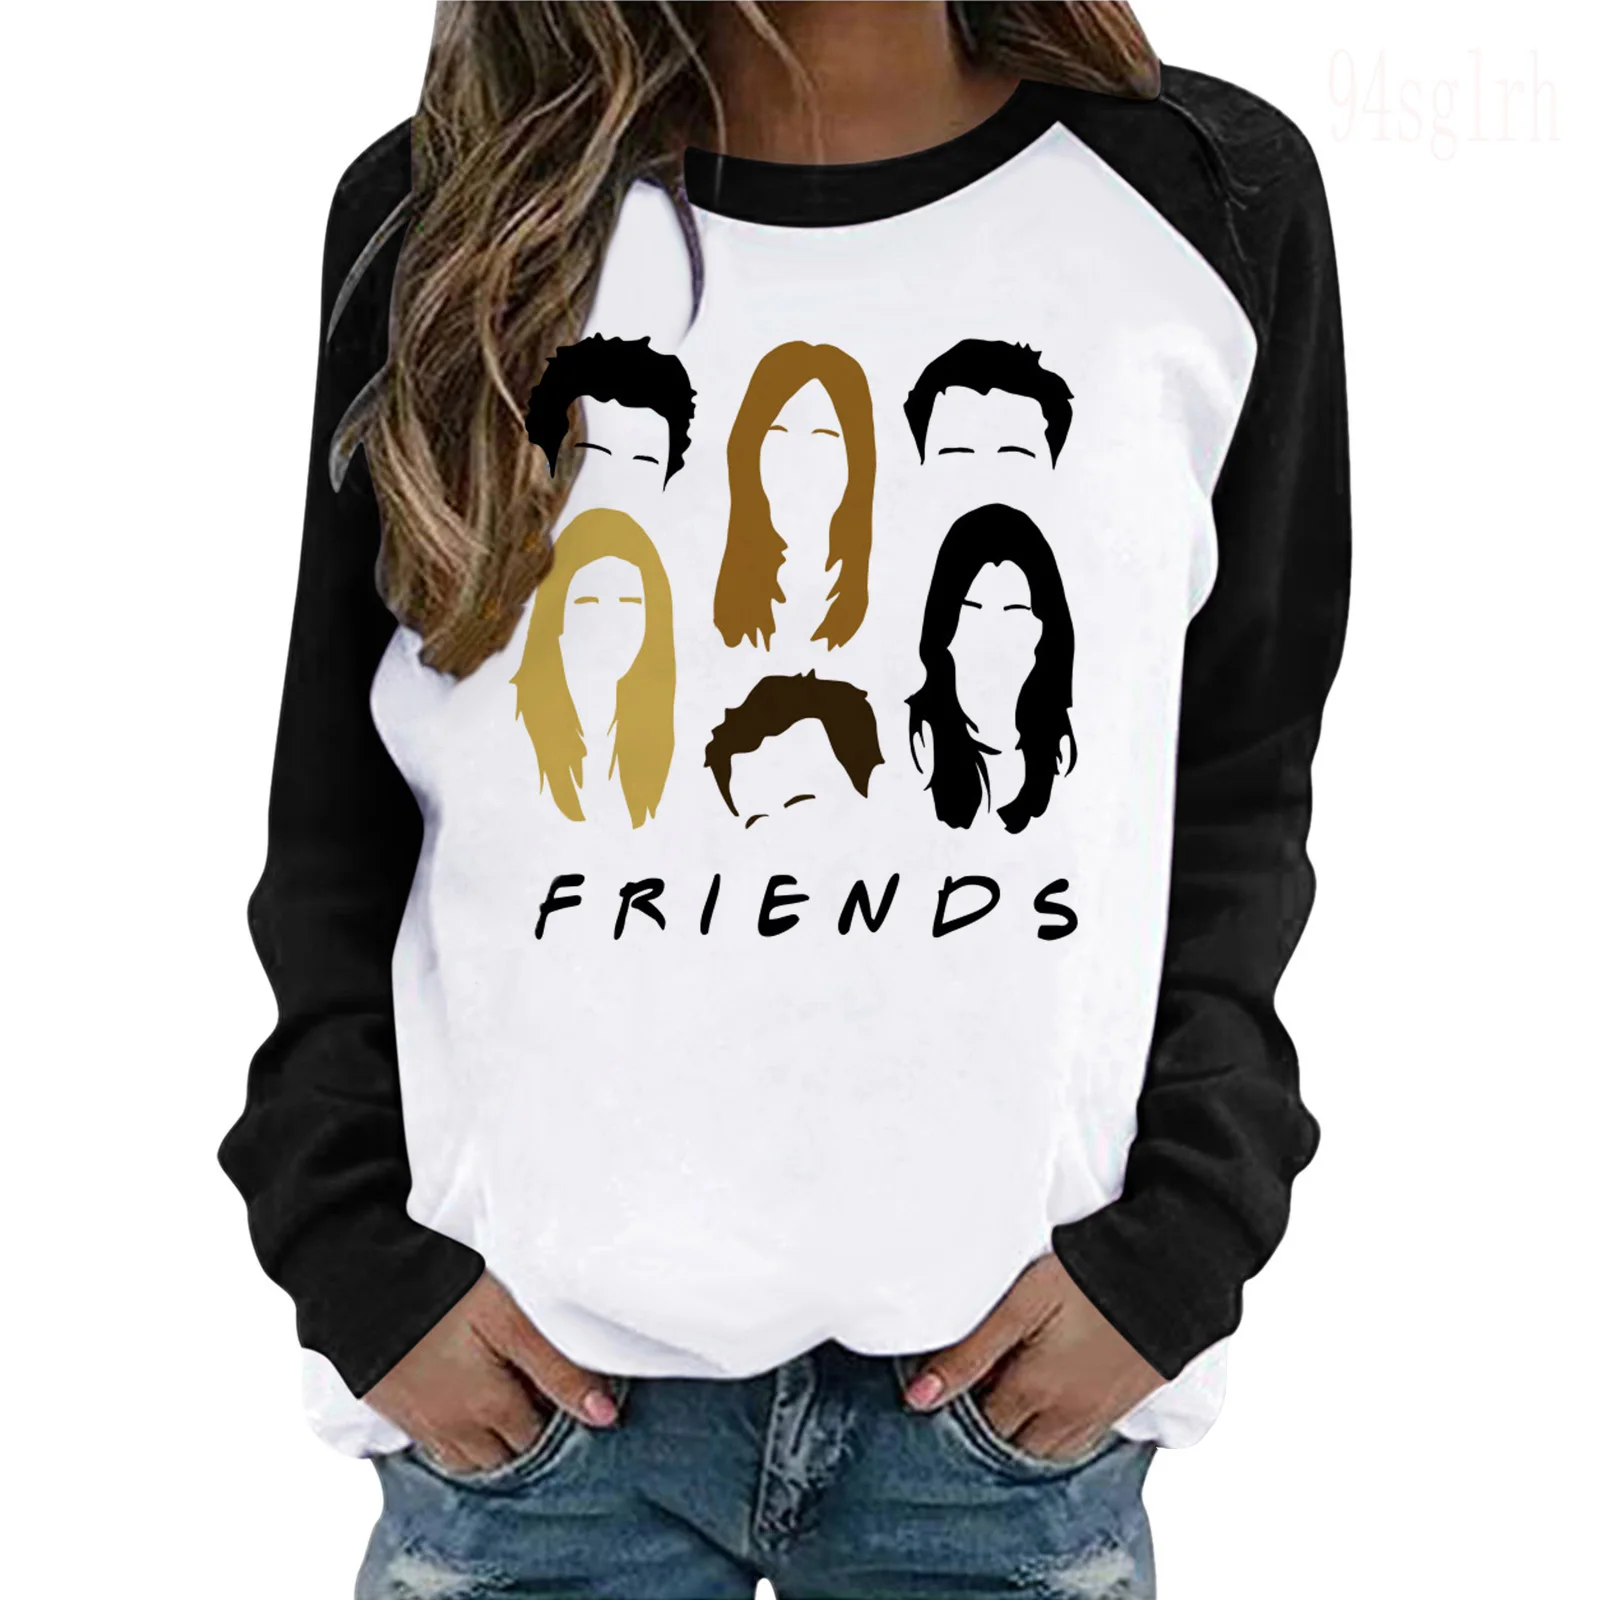 New Friends Tv Show Funny Cartoon T Shirt Women Aesthetic Best Friends Graphic T-shirt Streetwear Long Sleeve Tshirt Tops Female graphic tees Tees